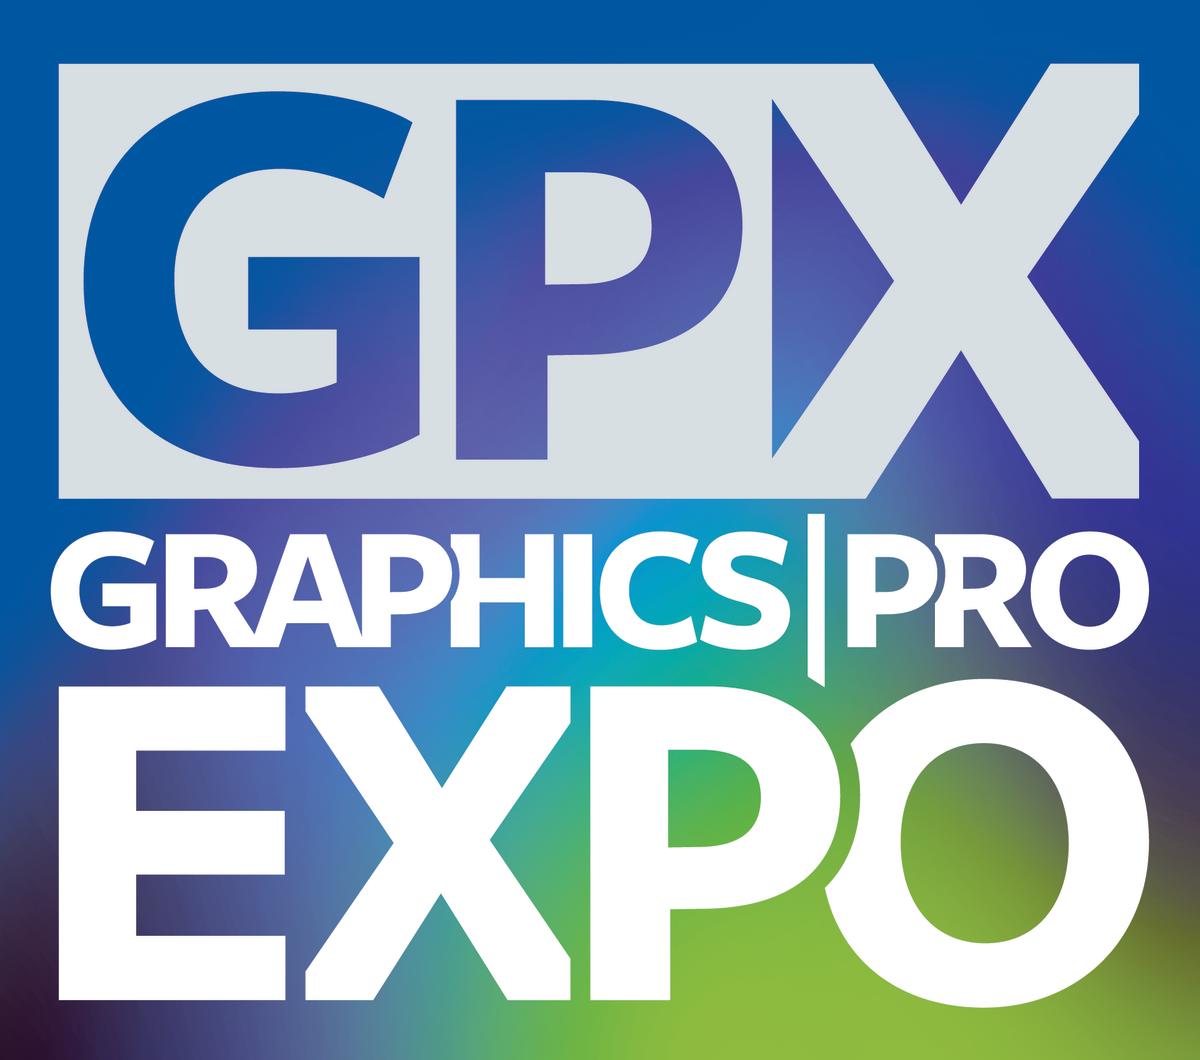 National Business Media - Graphics Pro Expo